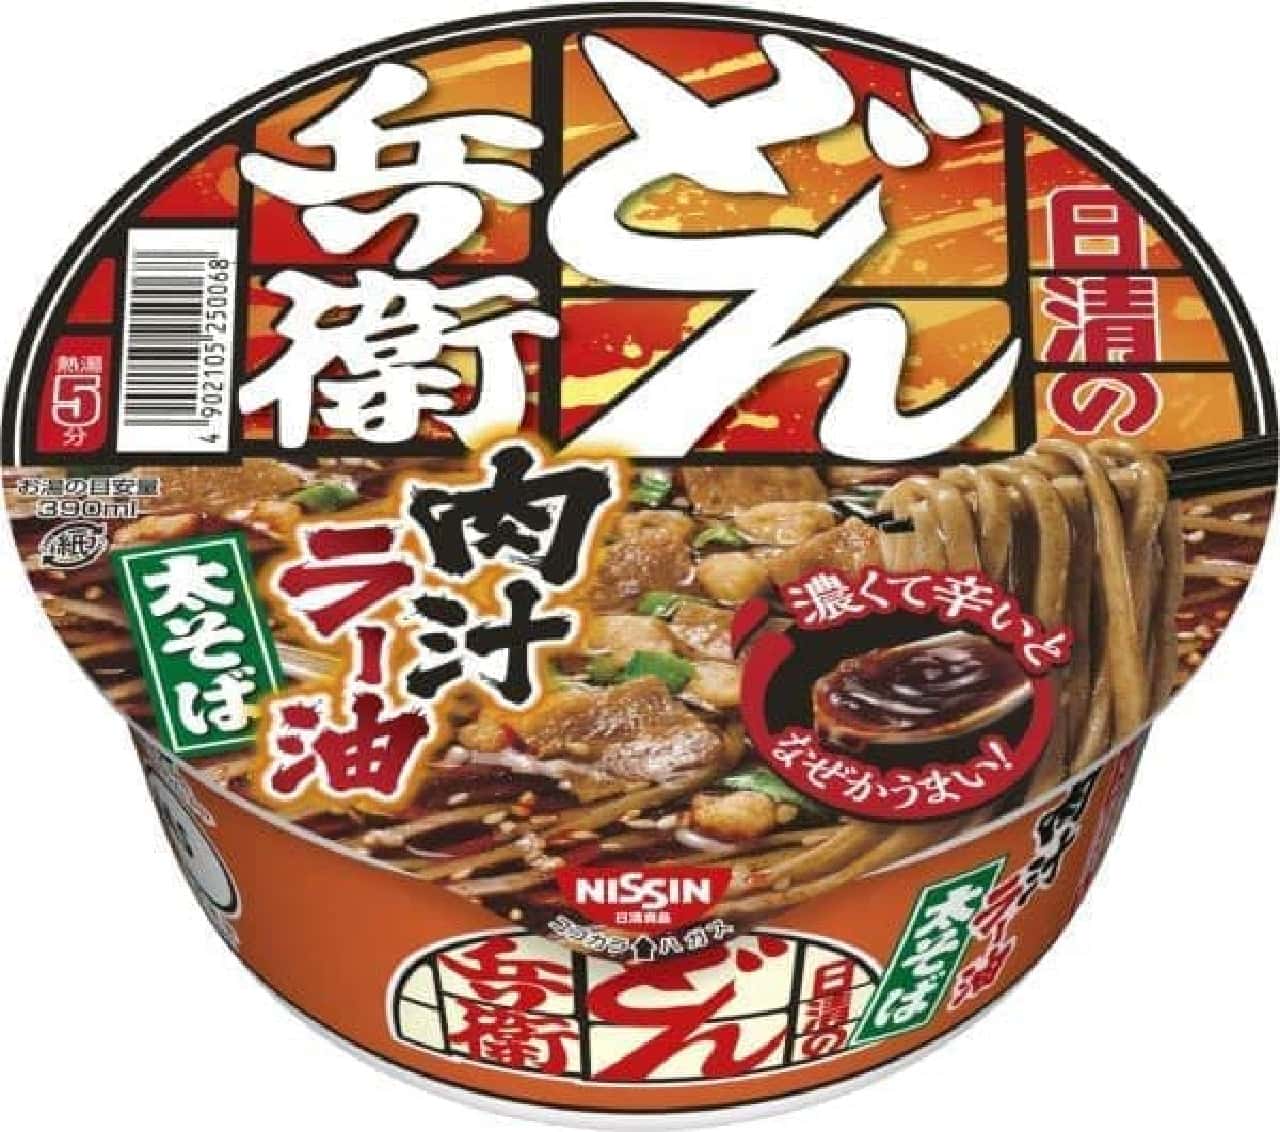 Nissin Donbei Meat Juice Chili Oil Soba